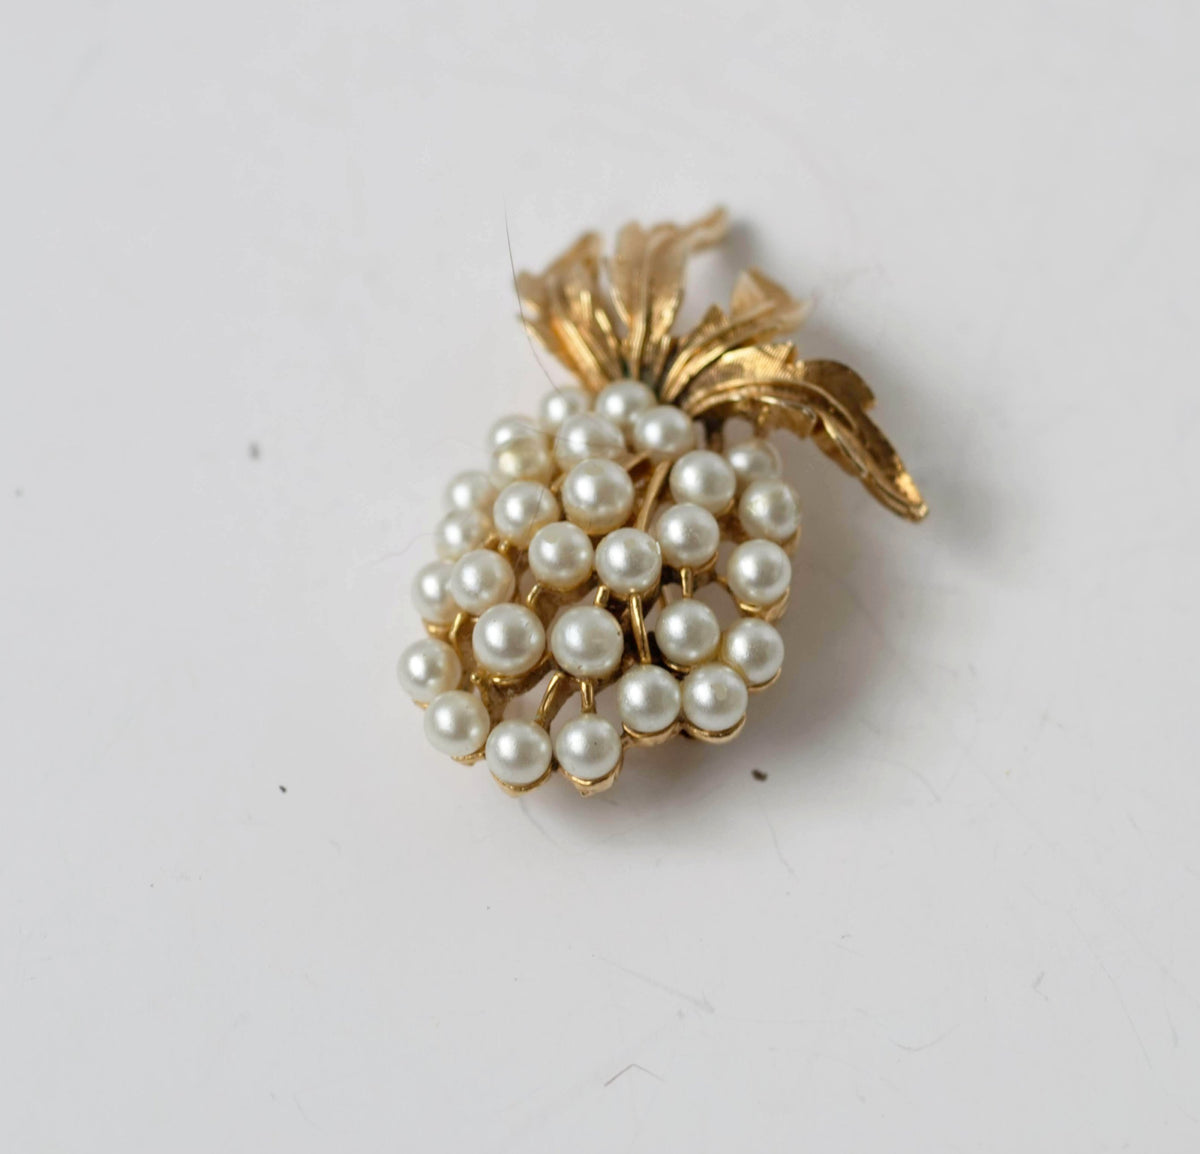 Art Pearls Pineapple Brooch - A Vintage Whimsical Jewelry Charm from the Mid-Century